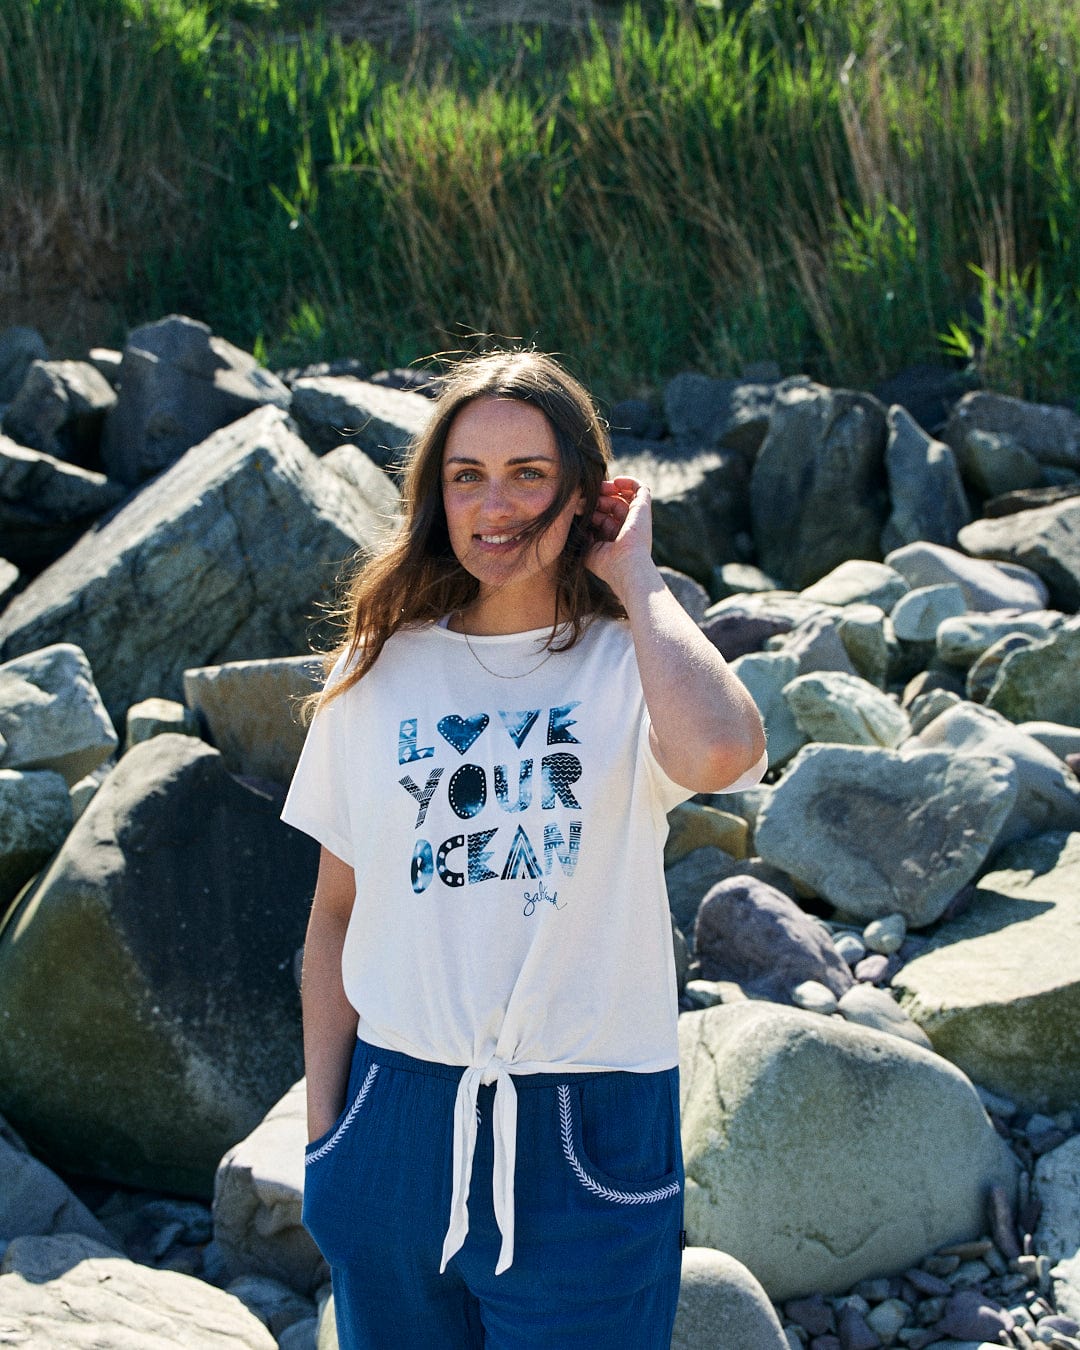 A person with long hair stands on a rocky shoreline wearing a loose-fit white t-shirt that reads "LOVE YOUR OCEAN" and blue pants. The shirt, named **Saltrock's Love Your Ocean - Recycled Womens T-Shirt - White**, is made from recycled material. They are smiling and touching their hair. Grass and rocks are visible in the background.